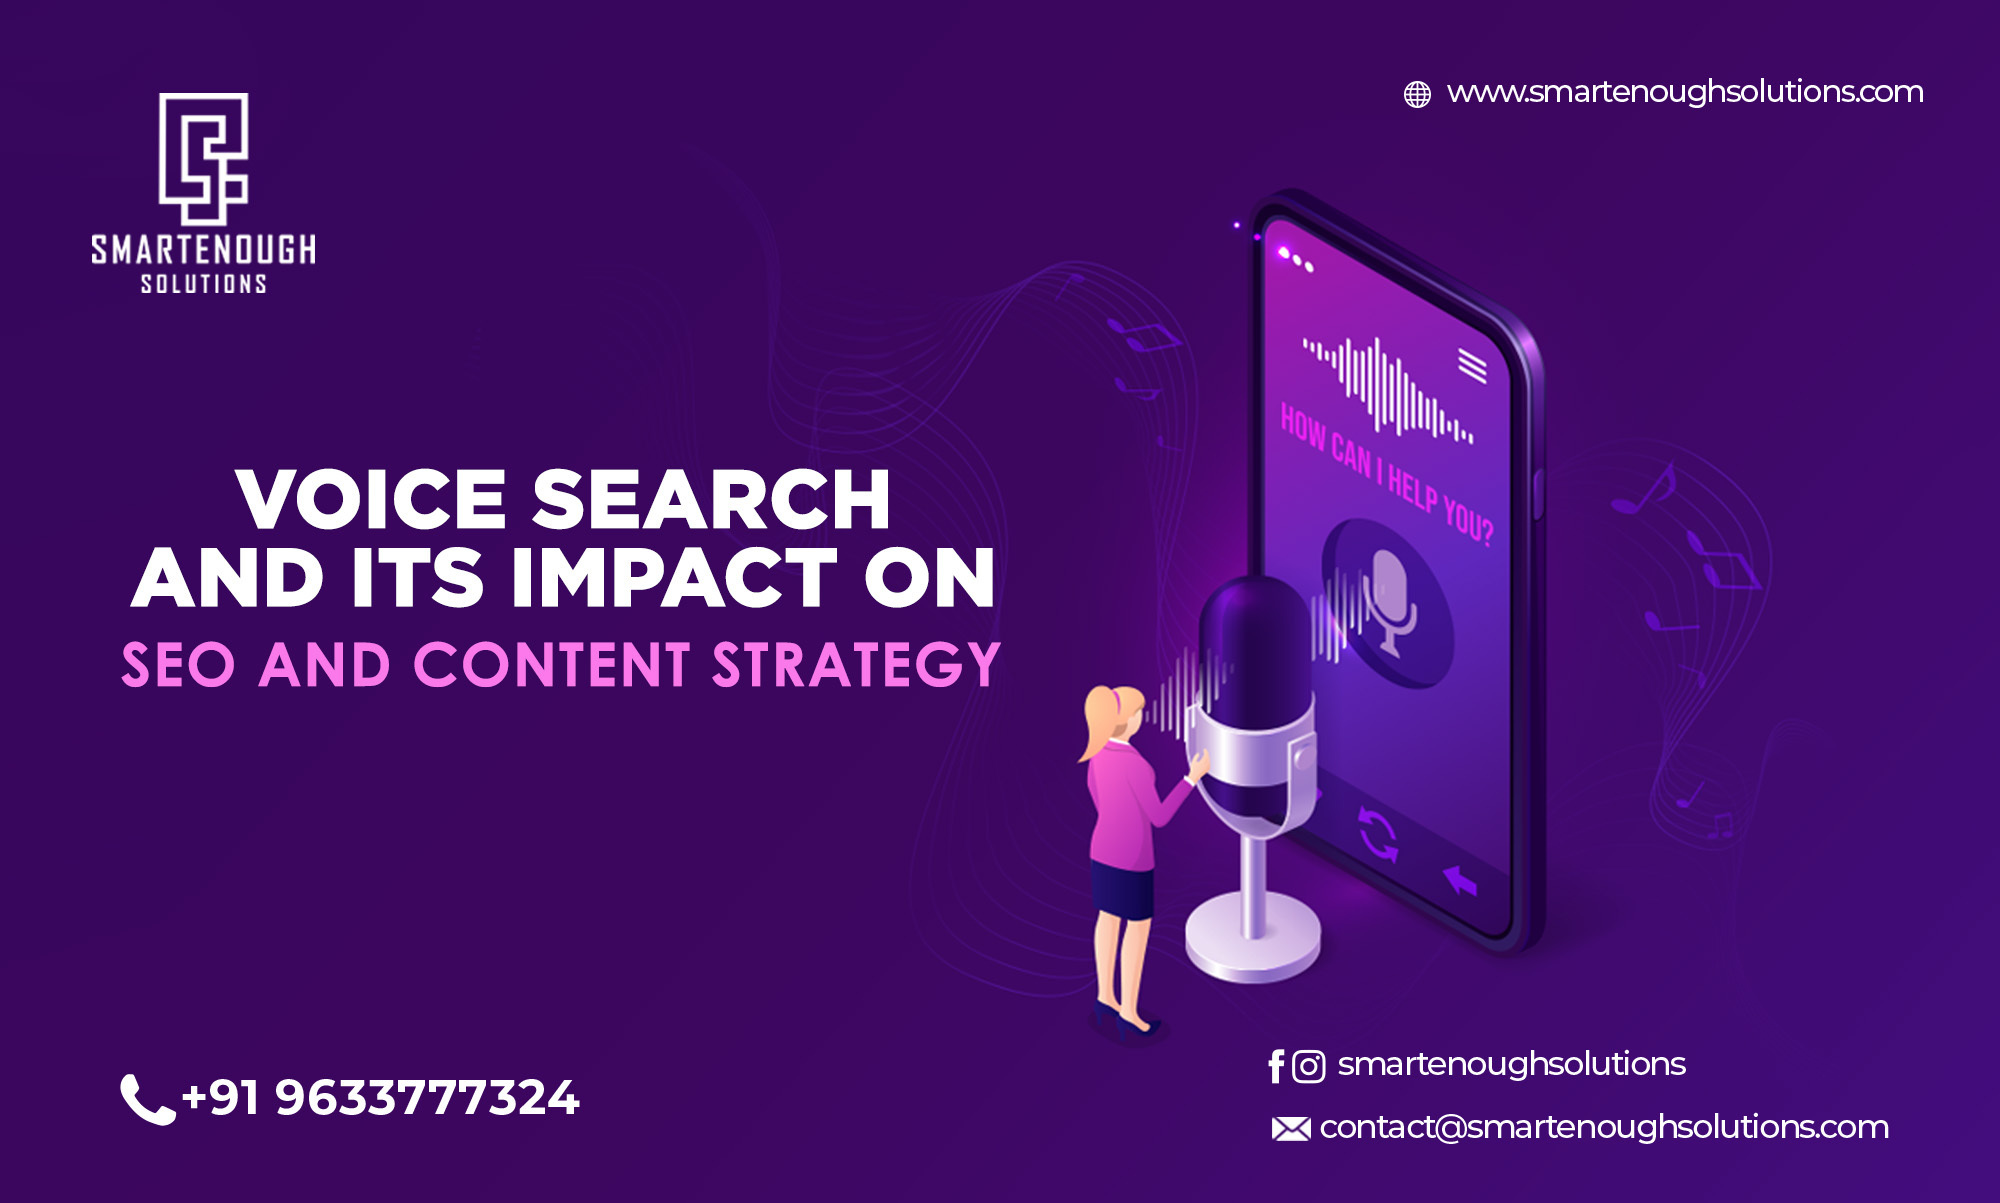 Voice Search And Its Impact On SEO And Content Strategy